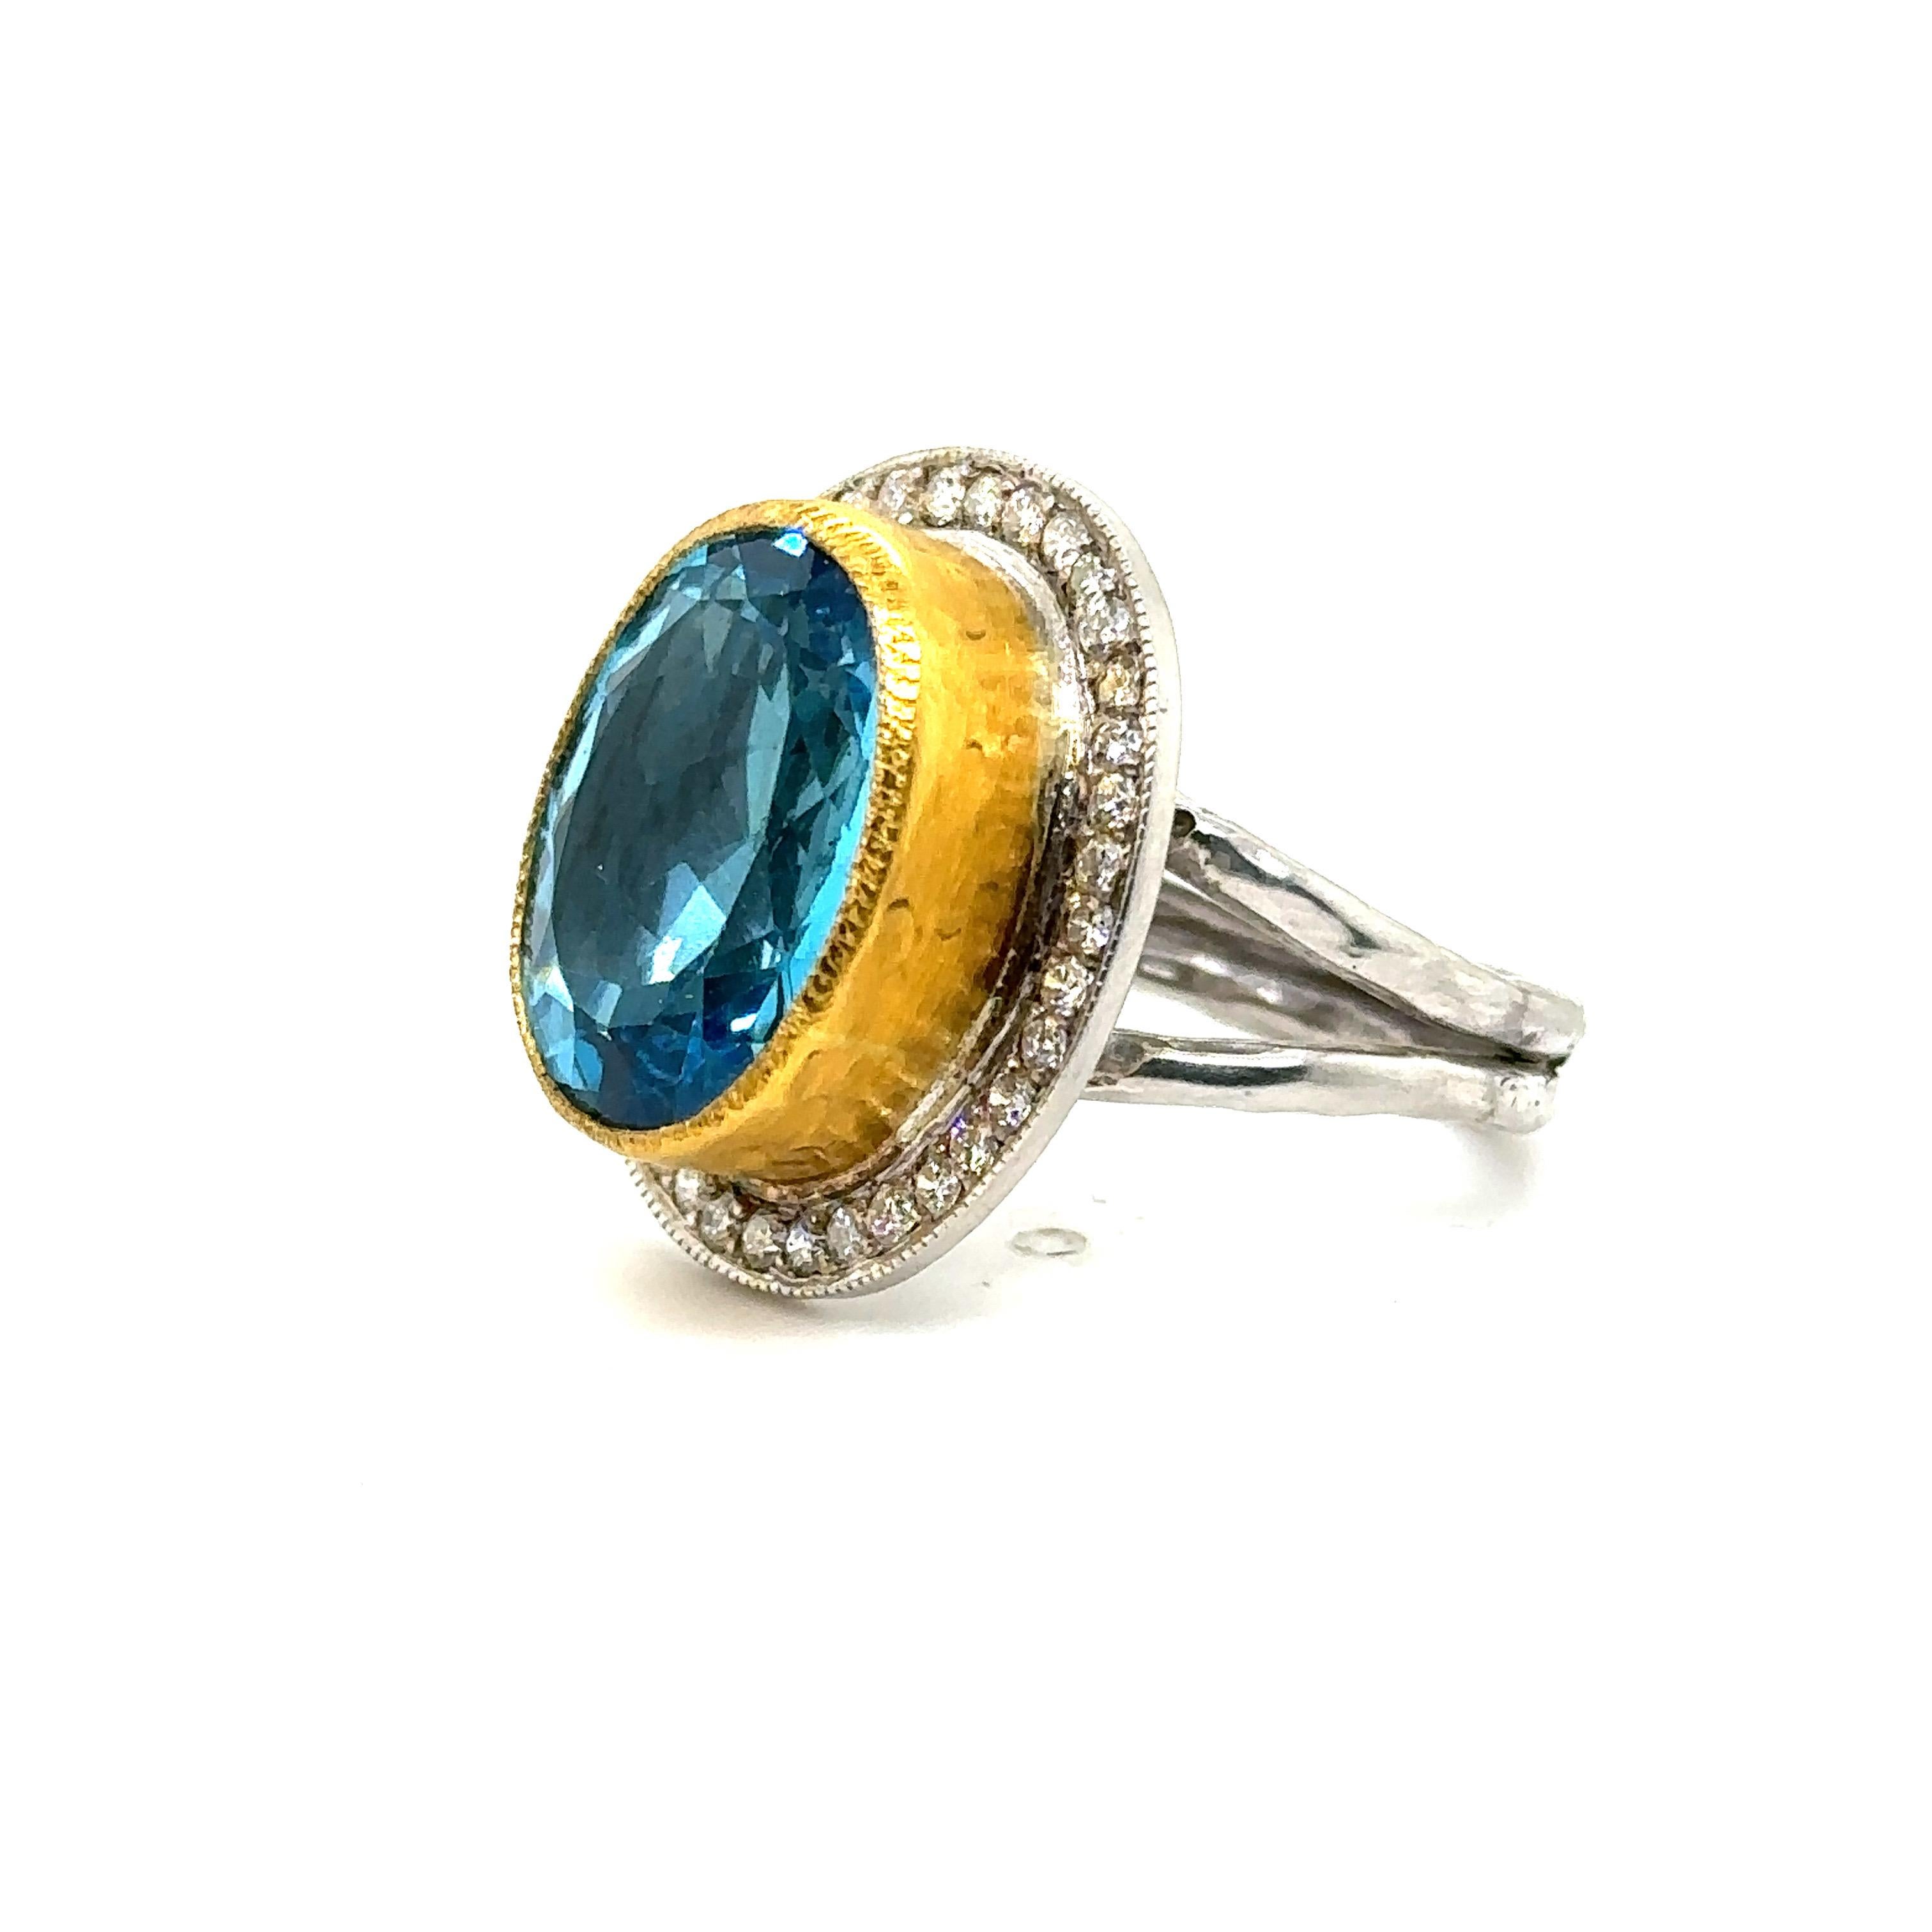 JAS-22-305 - 24K GOLD/STERLING SILVER RING with DIAMONDS AND SWISS BLUE TOPAZ For Sale 2